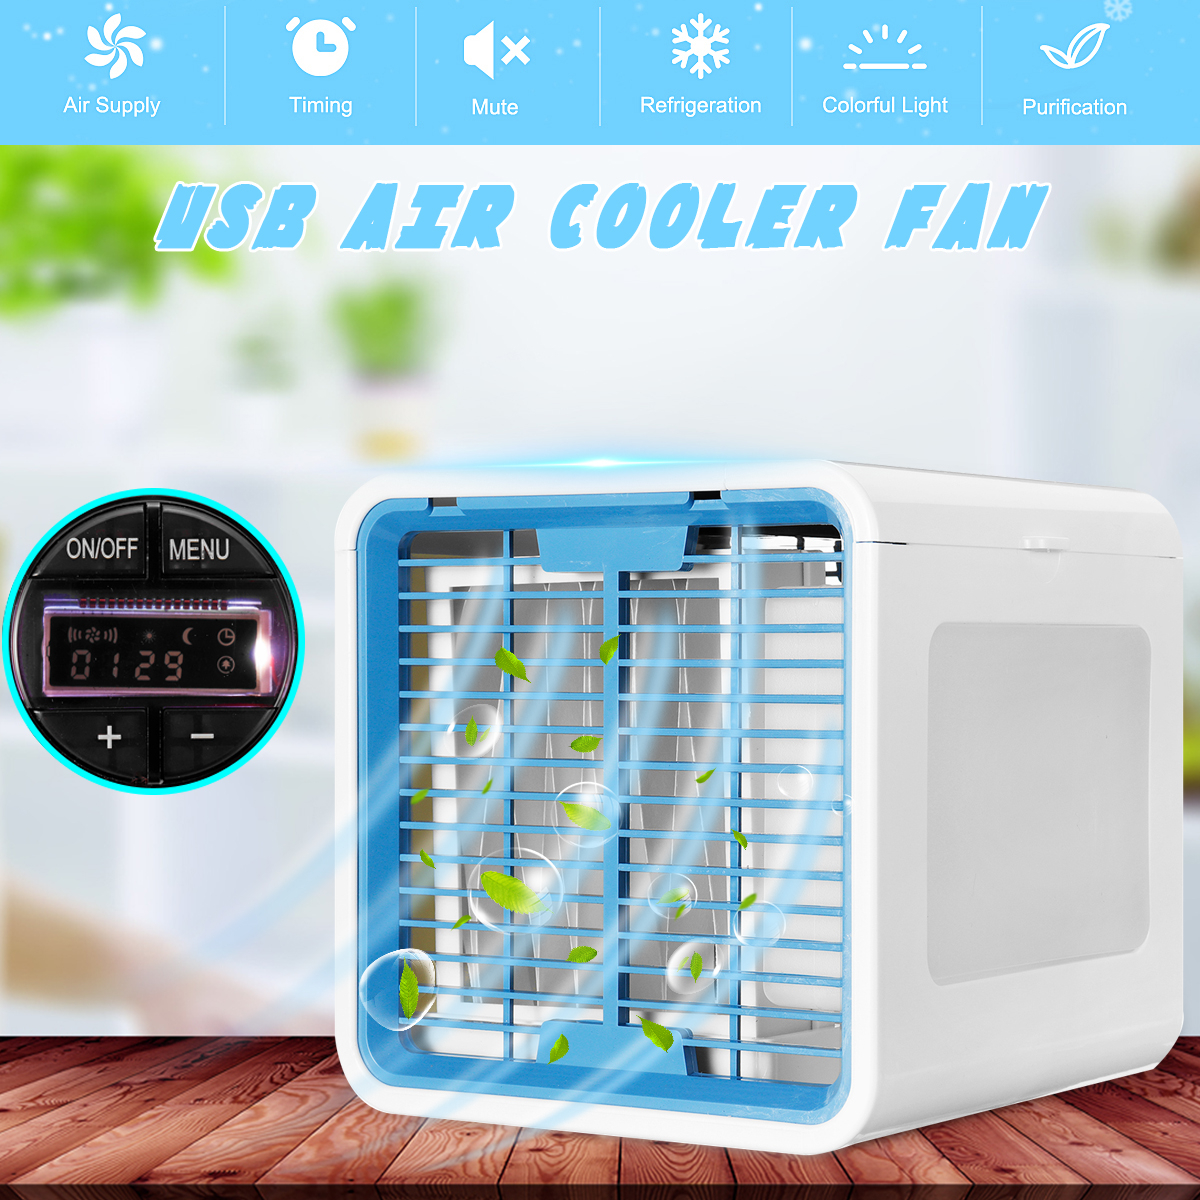 Display-Personal-Air-Cooler-USB-Portable-3-In-1-Refrigeration-Humidification-Purification-LED-Table--1516587-1